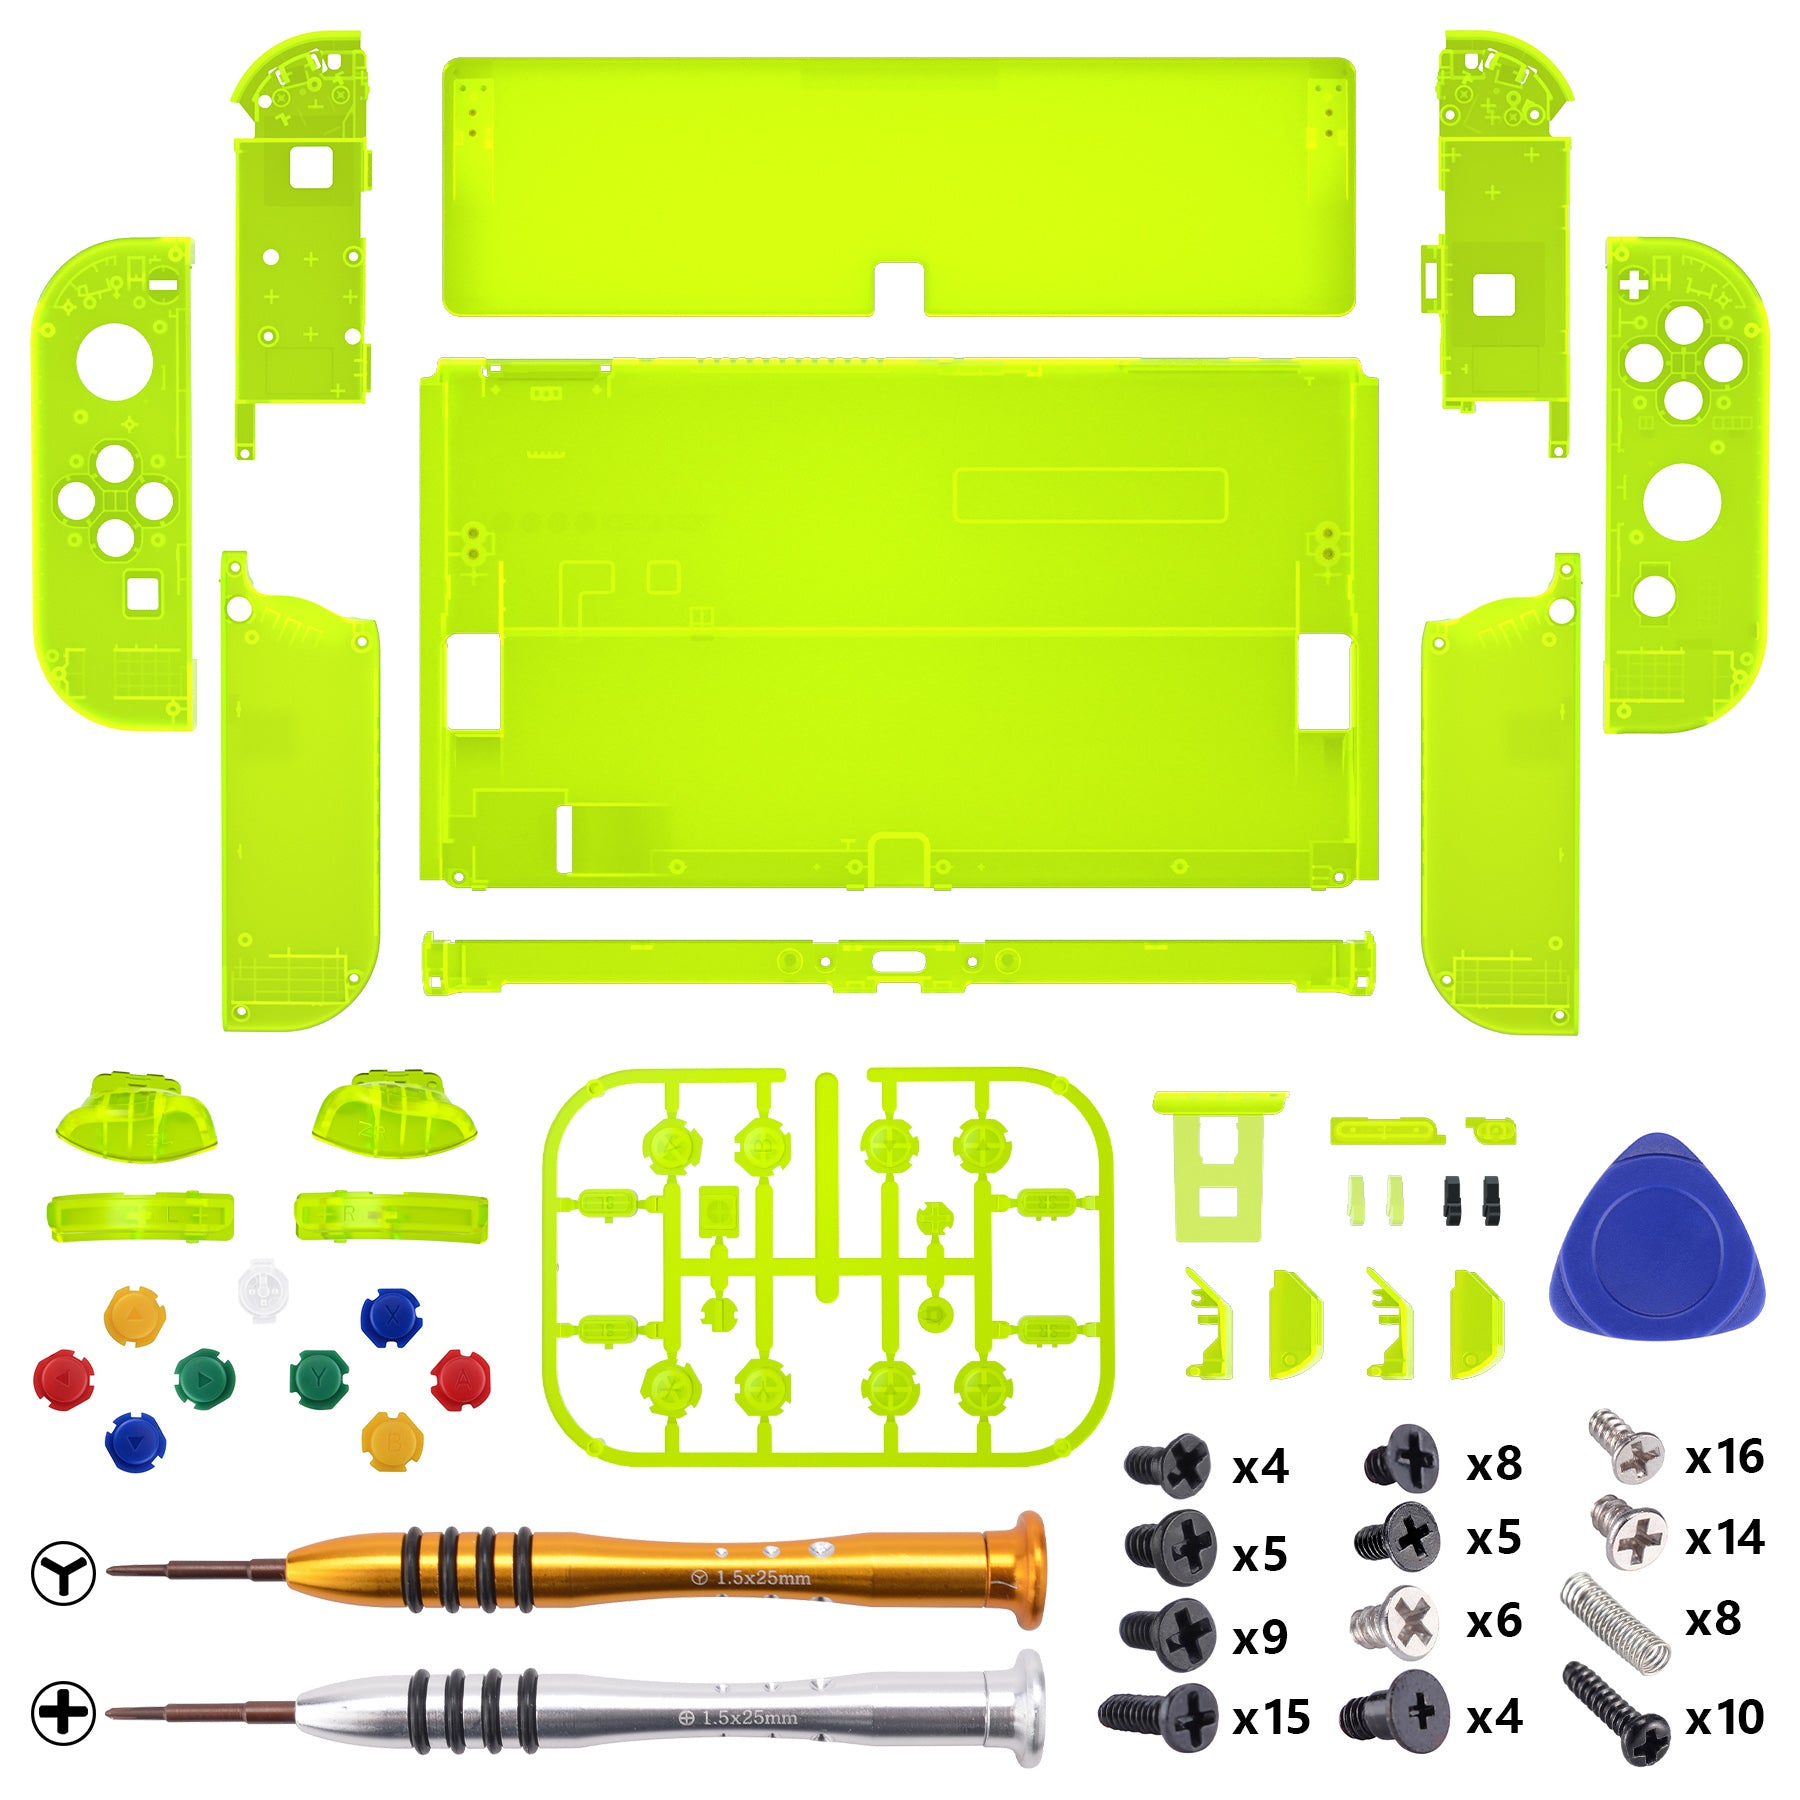  eXtremeRate DIY Full Set Shell for Nintendo Switch OLED,  Replacement Console Back Plate & Kickstand, Custom NS Controller Housing  with Full Set Buttons for Nintendo Switch OLED - Clear Atomic Purple 